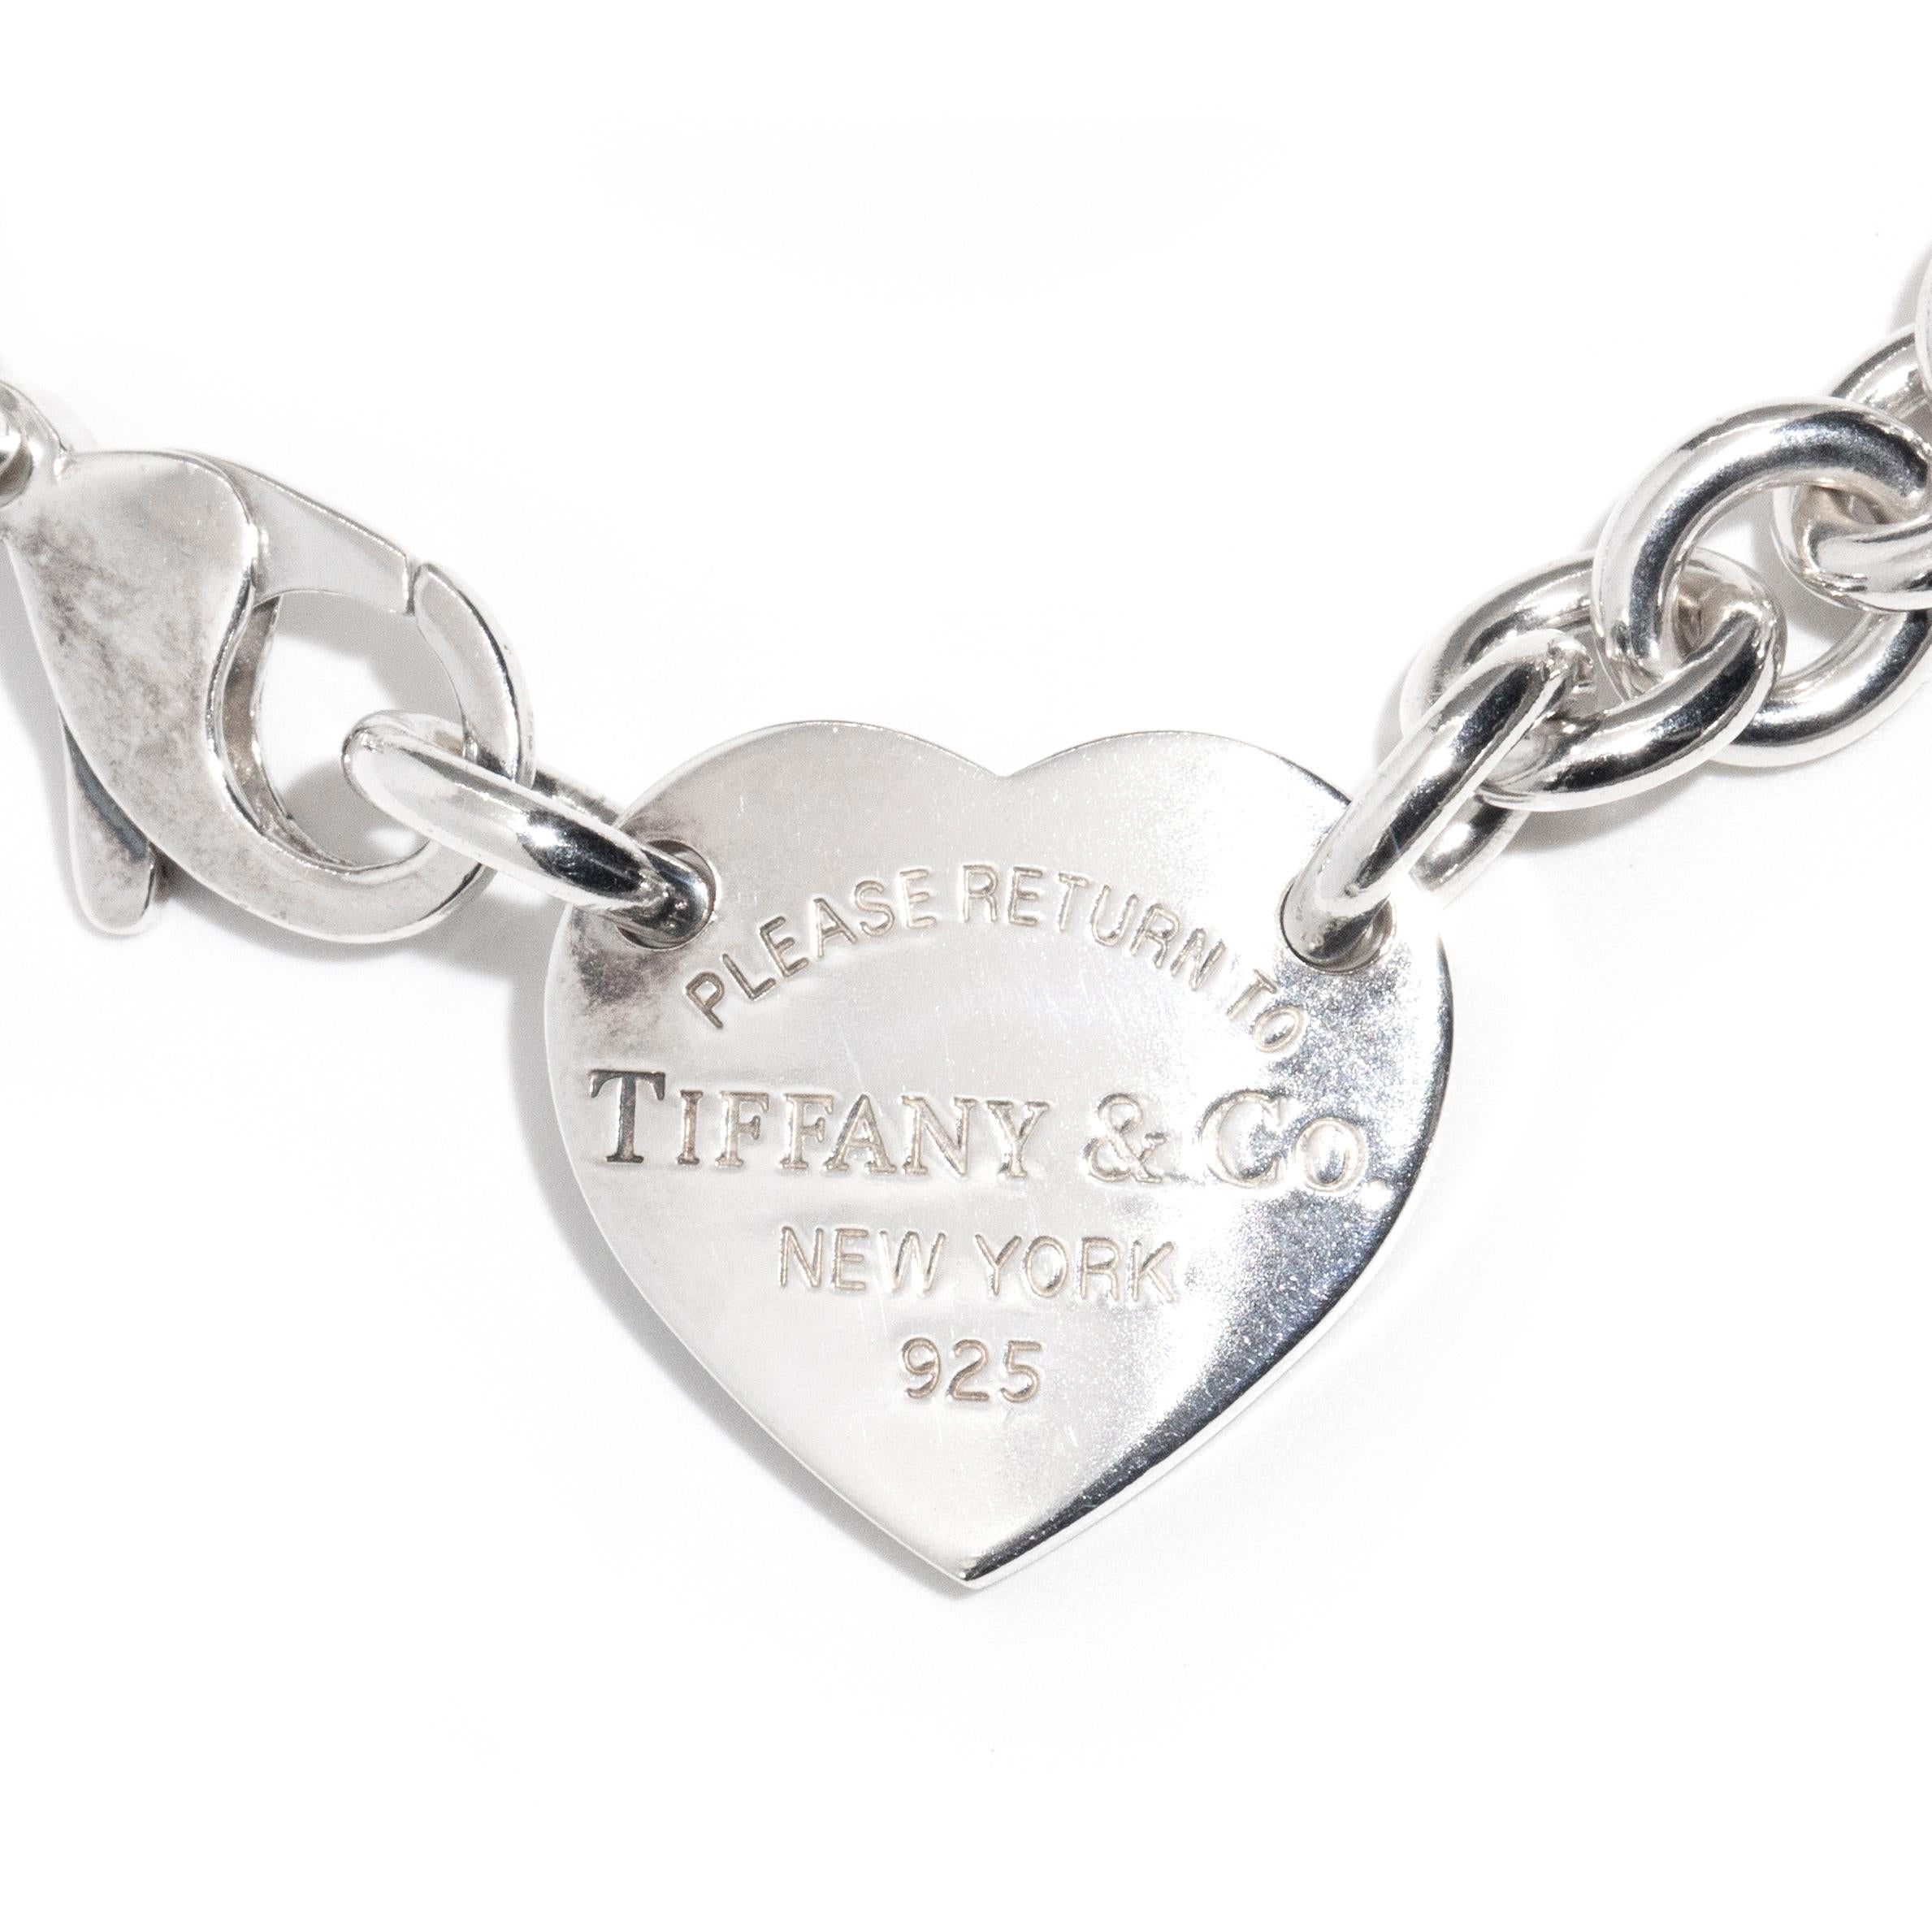 Modern Tiffany & Co. Sterling Silver Chain Link Necklace & Hallmarked Heart Tag Pendant